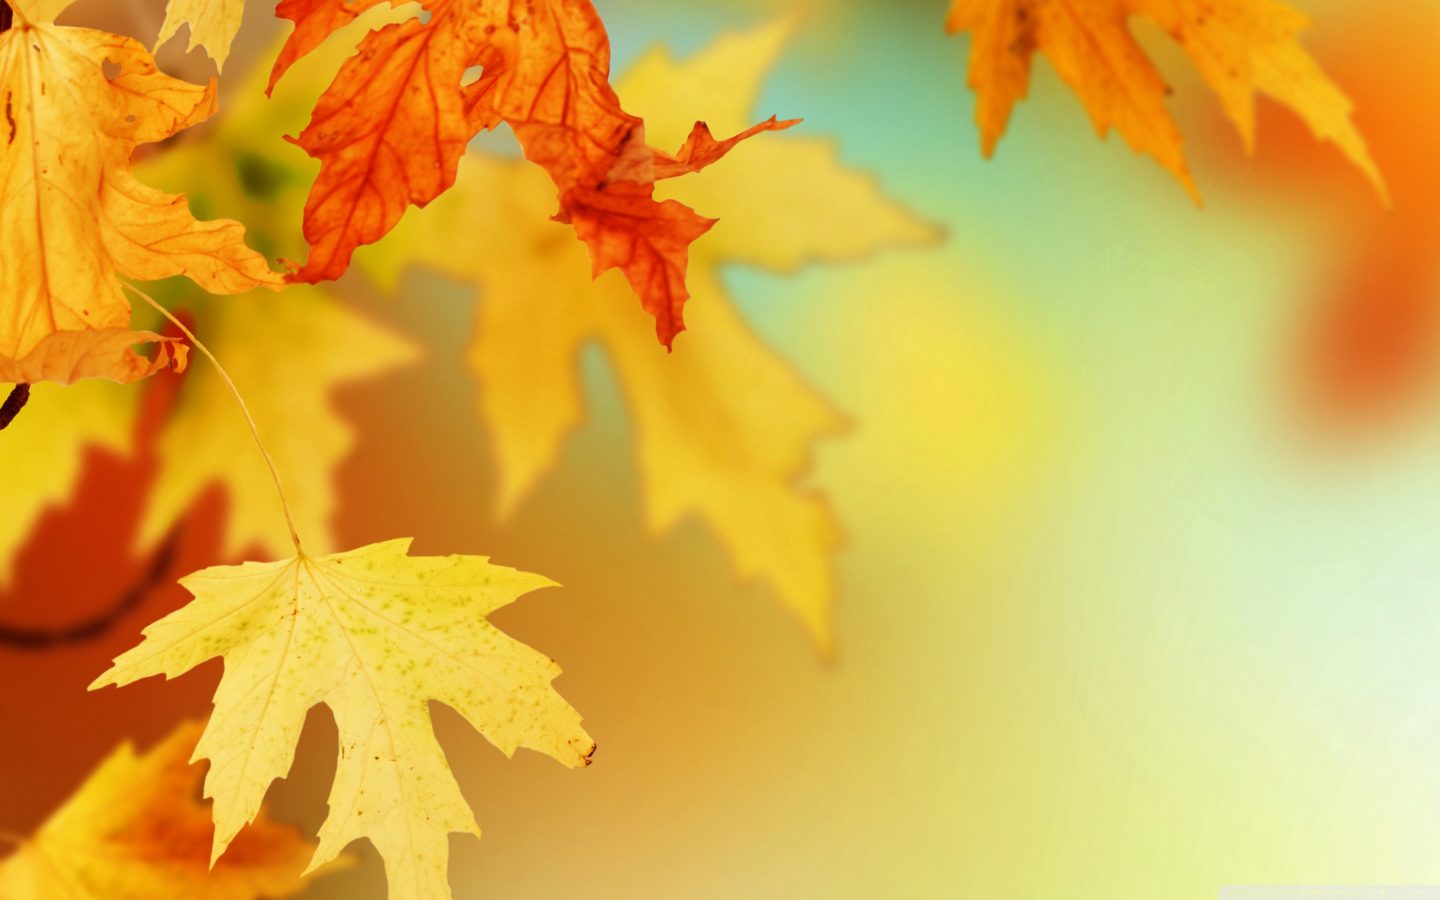 Fall-Leaves-Wallpaper-On-Wallpaper-natural background hd